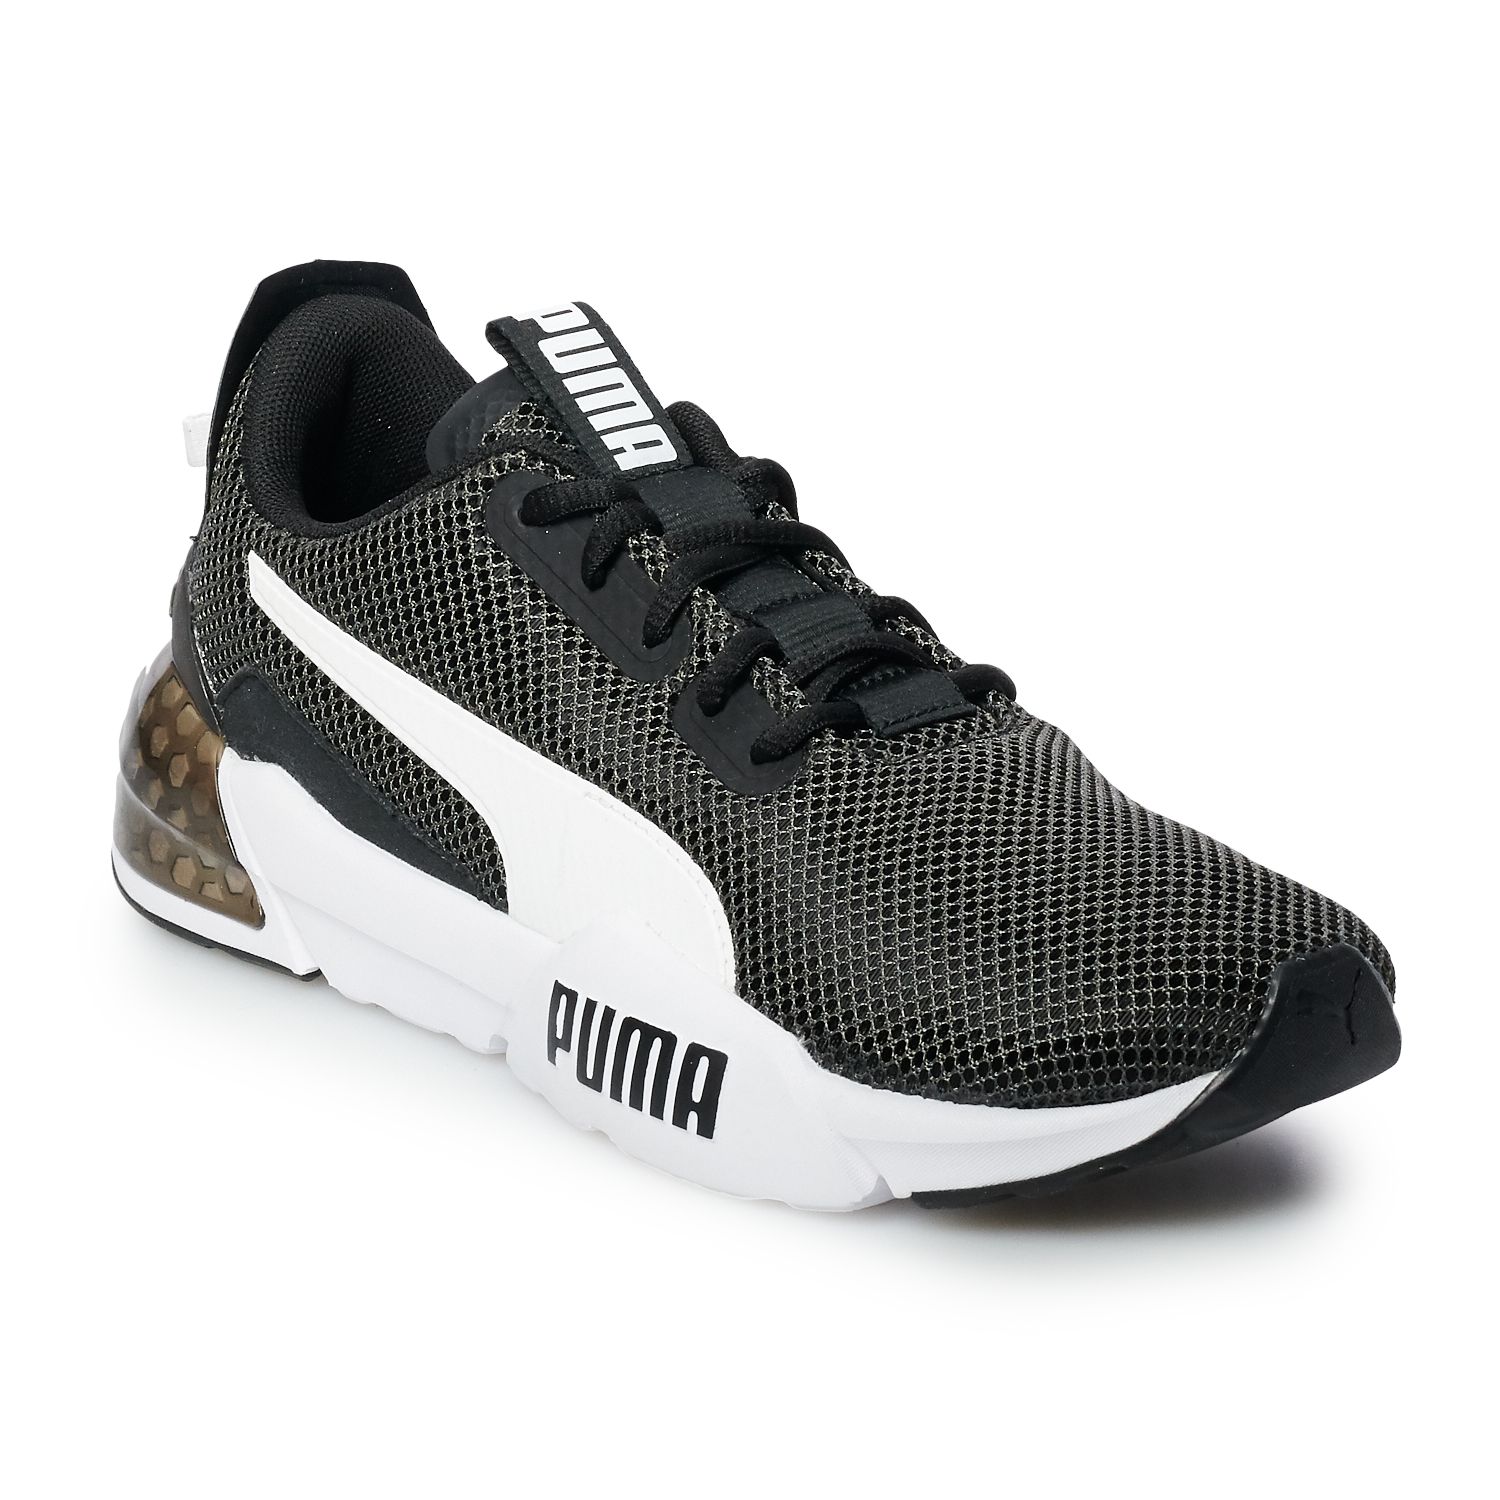 PUMA Cell Phase Men's Sneakers